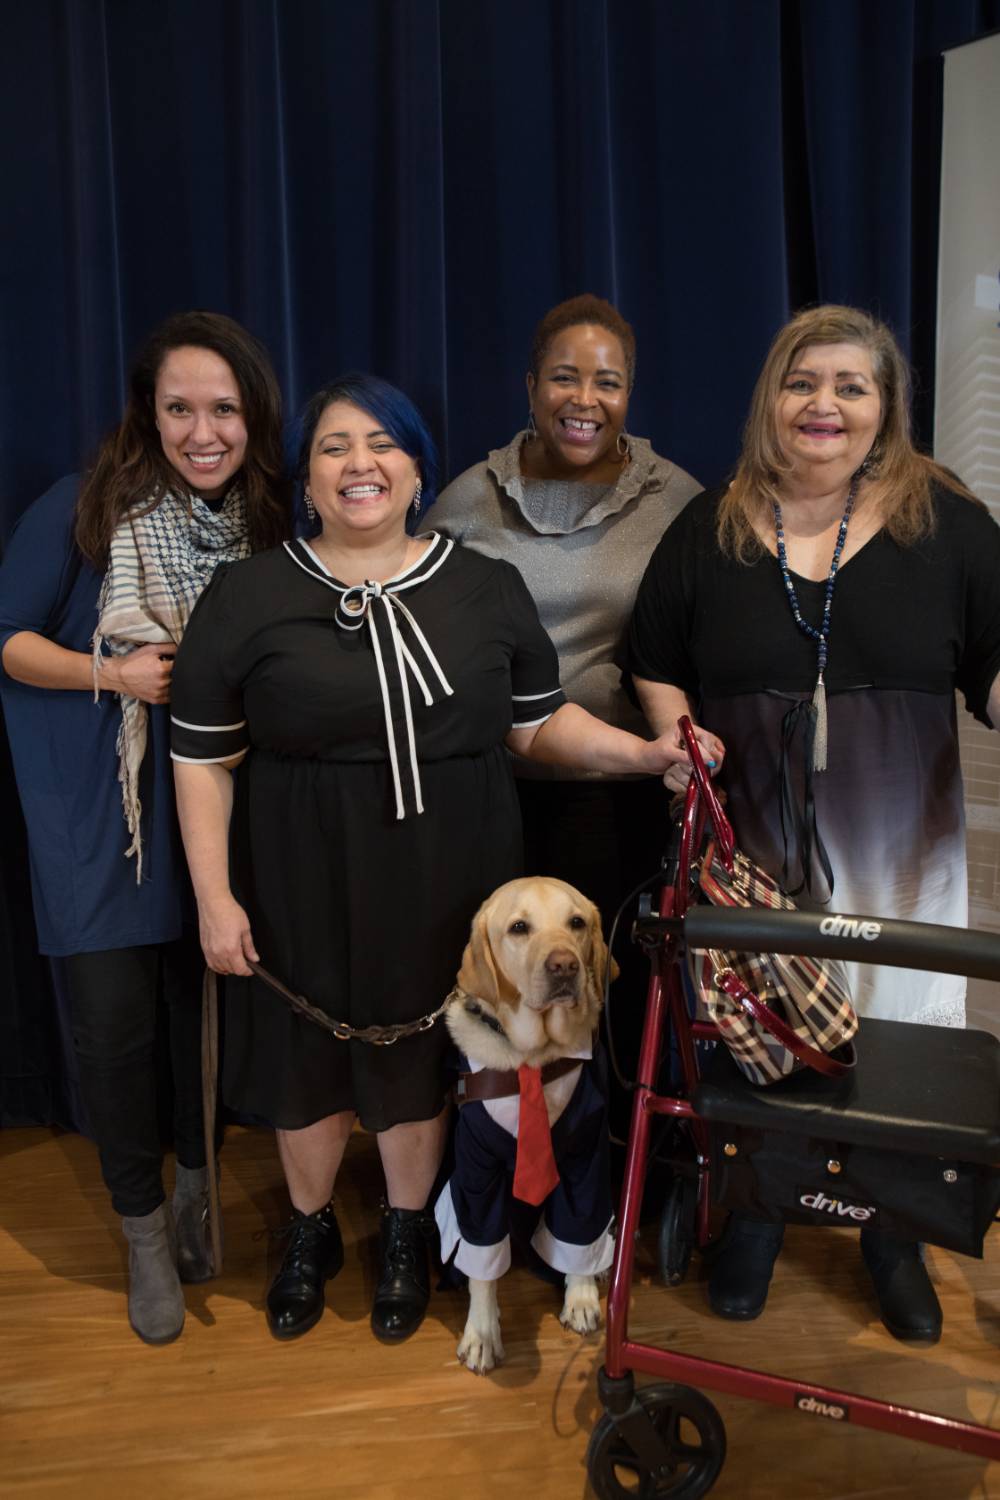 Group photo of four women, one with her service dog and another with a walker. They are all smiling